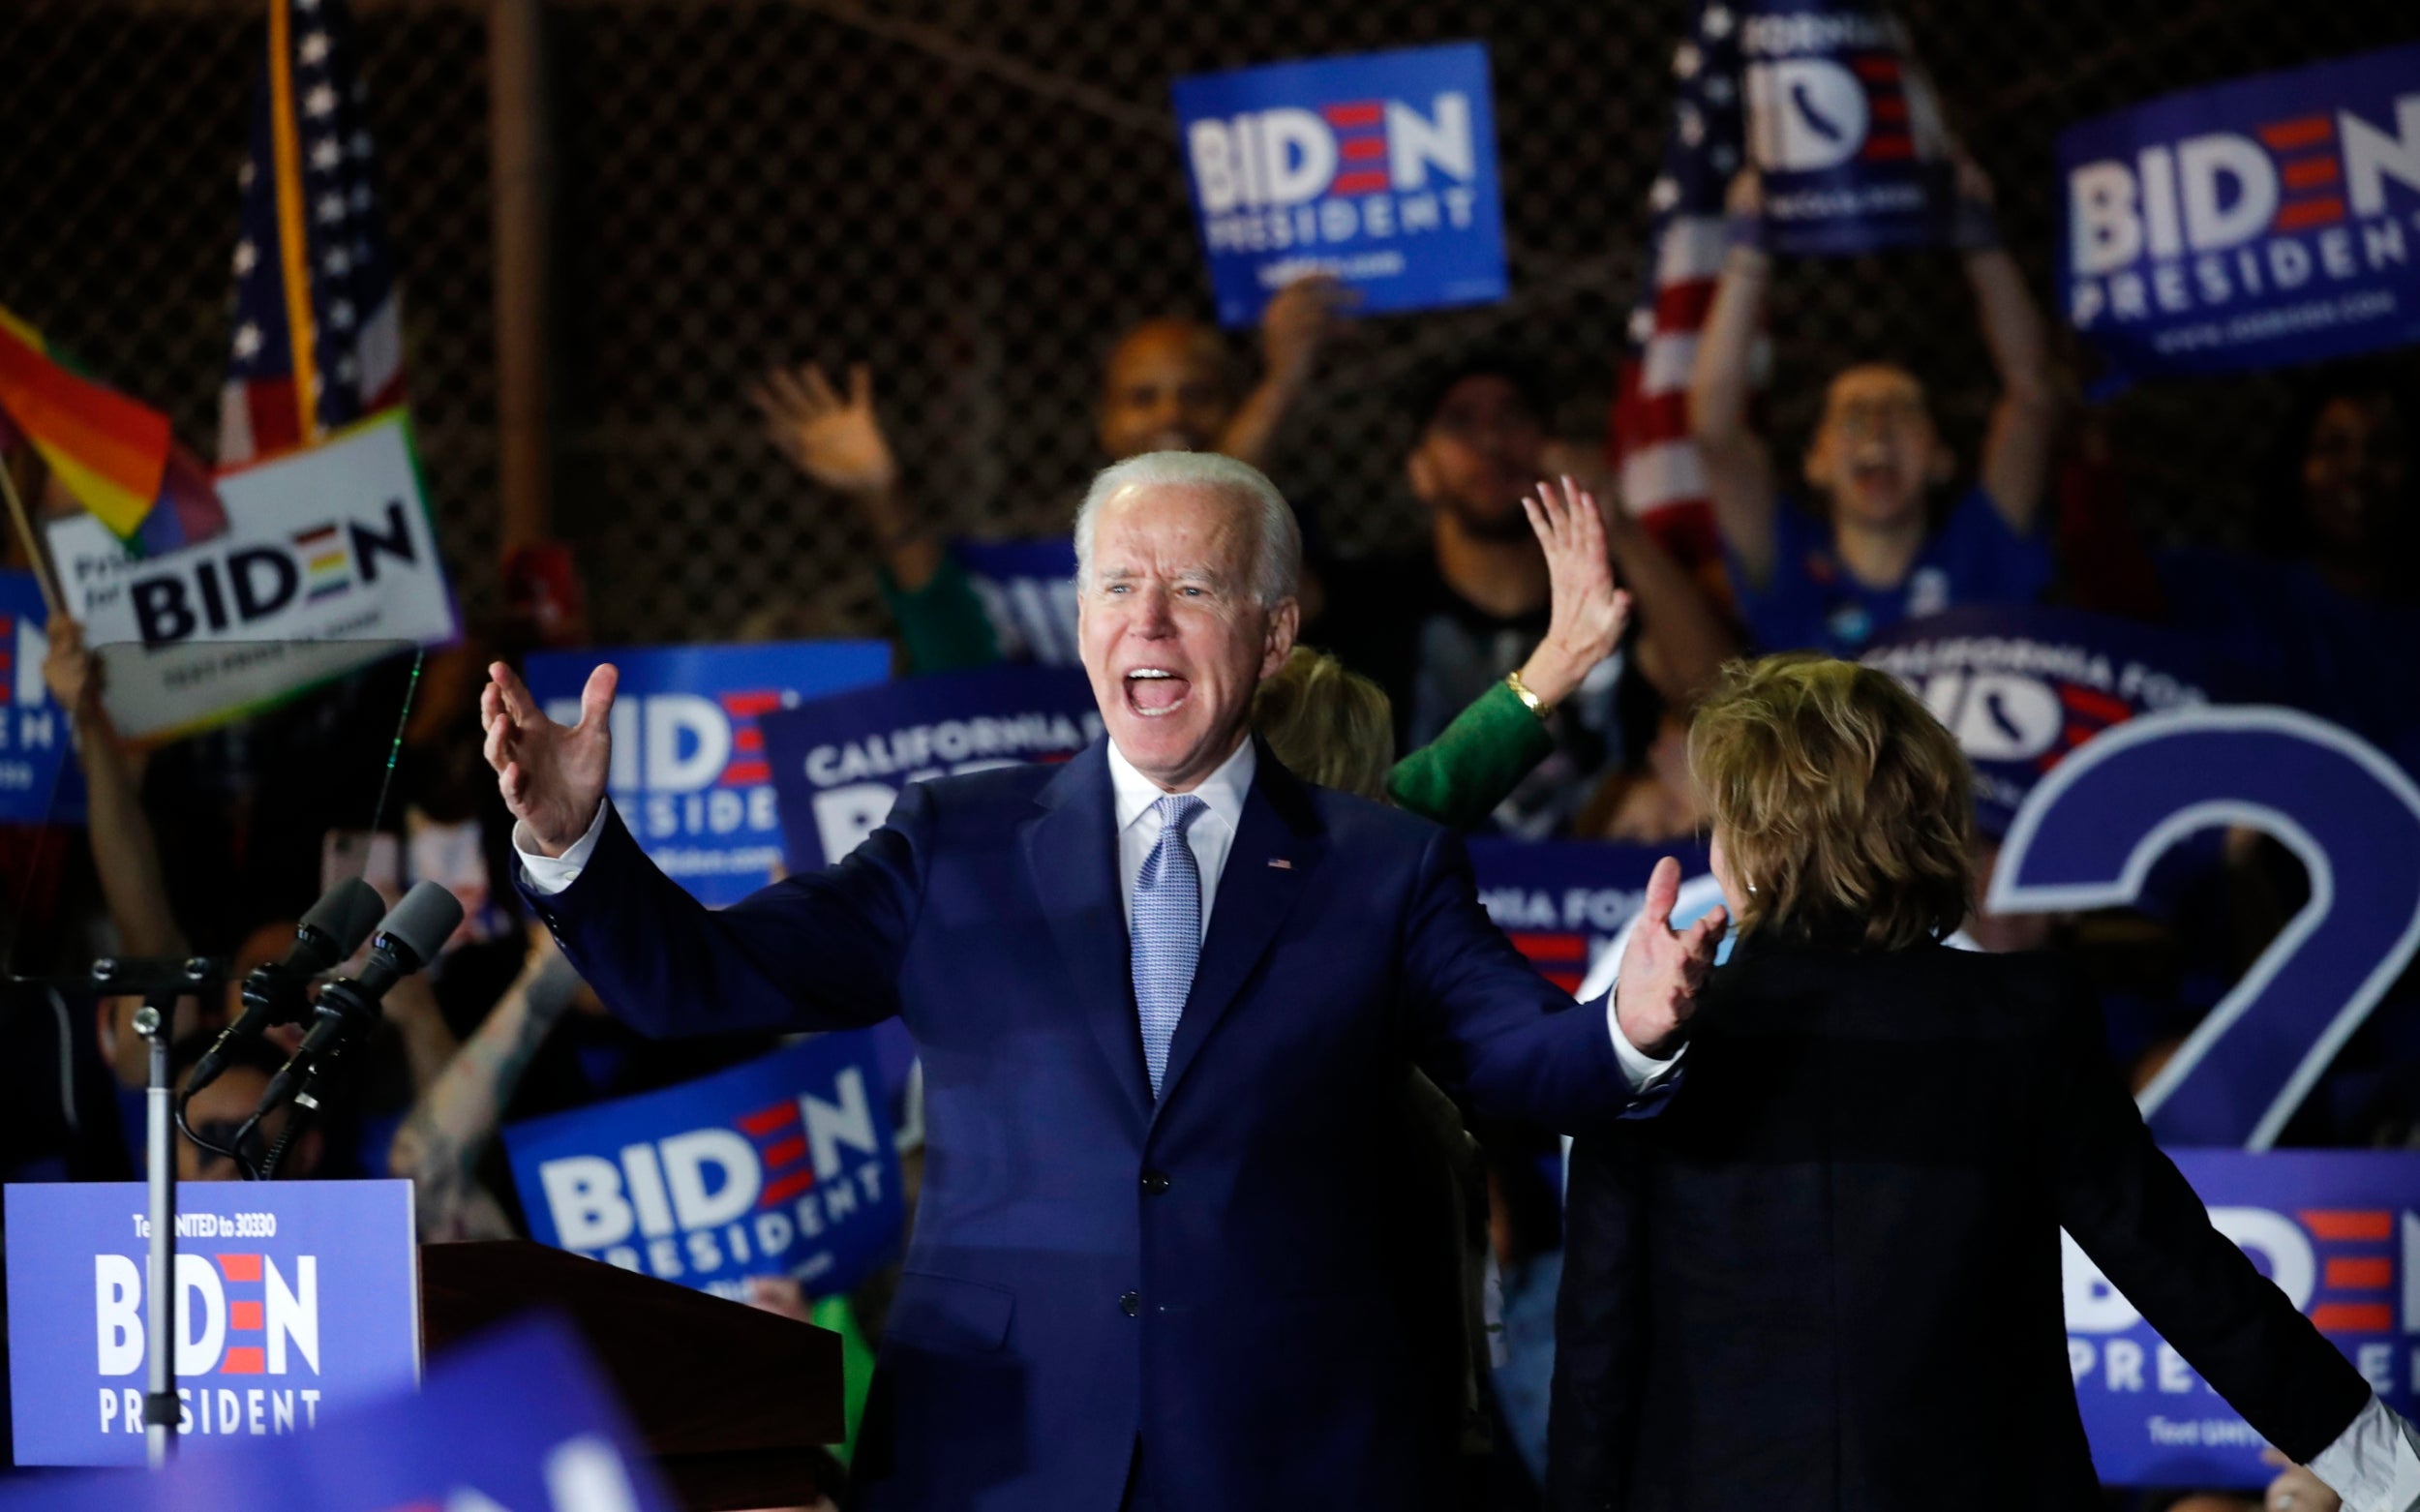 Comeback trail: Biden addresses supporters at a rally in Los Angeles on Tuesday